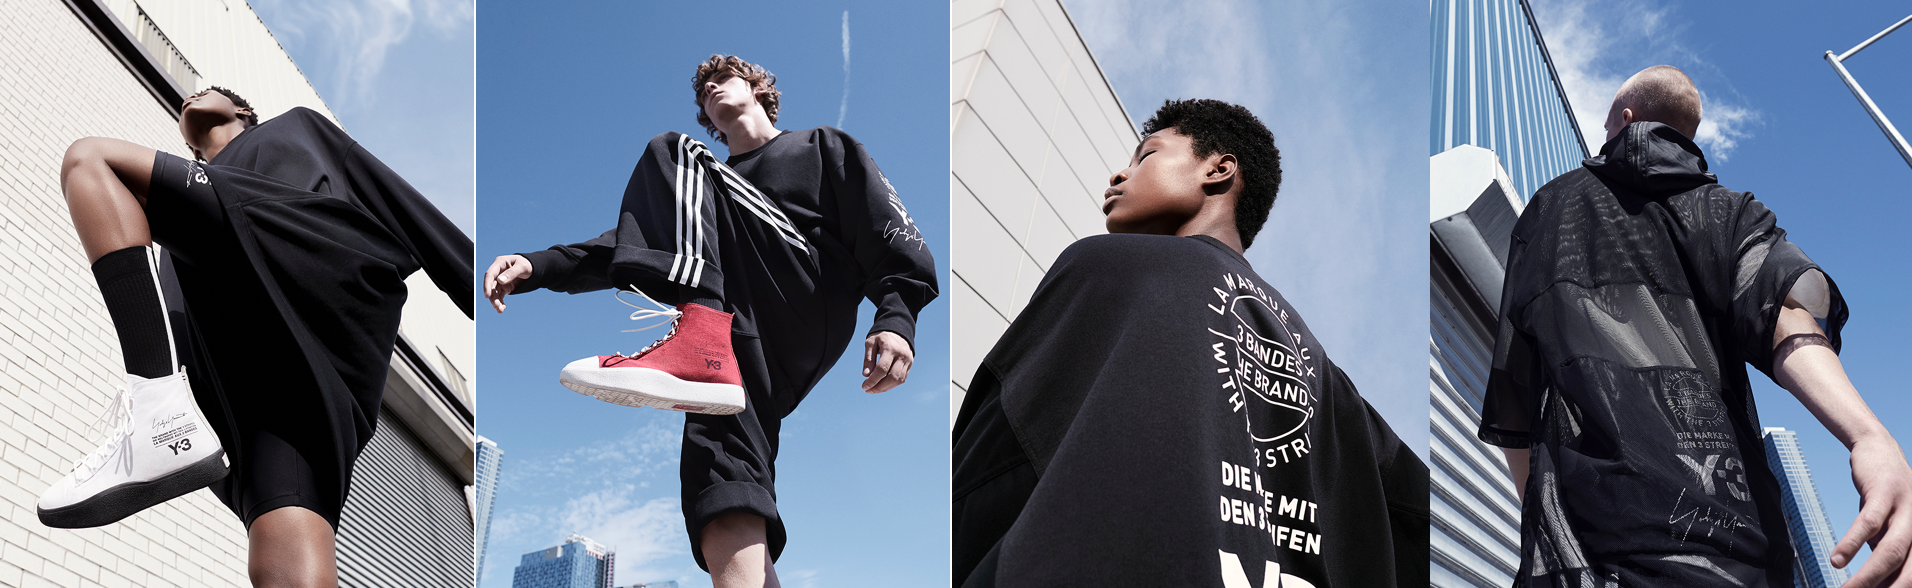 Take A Look At Chapter 1 of Y-3’s SS18 Campaign